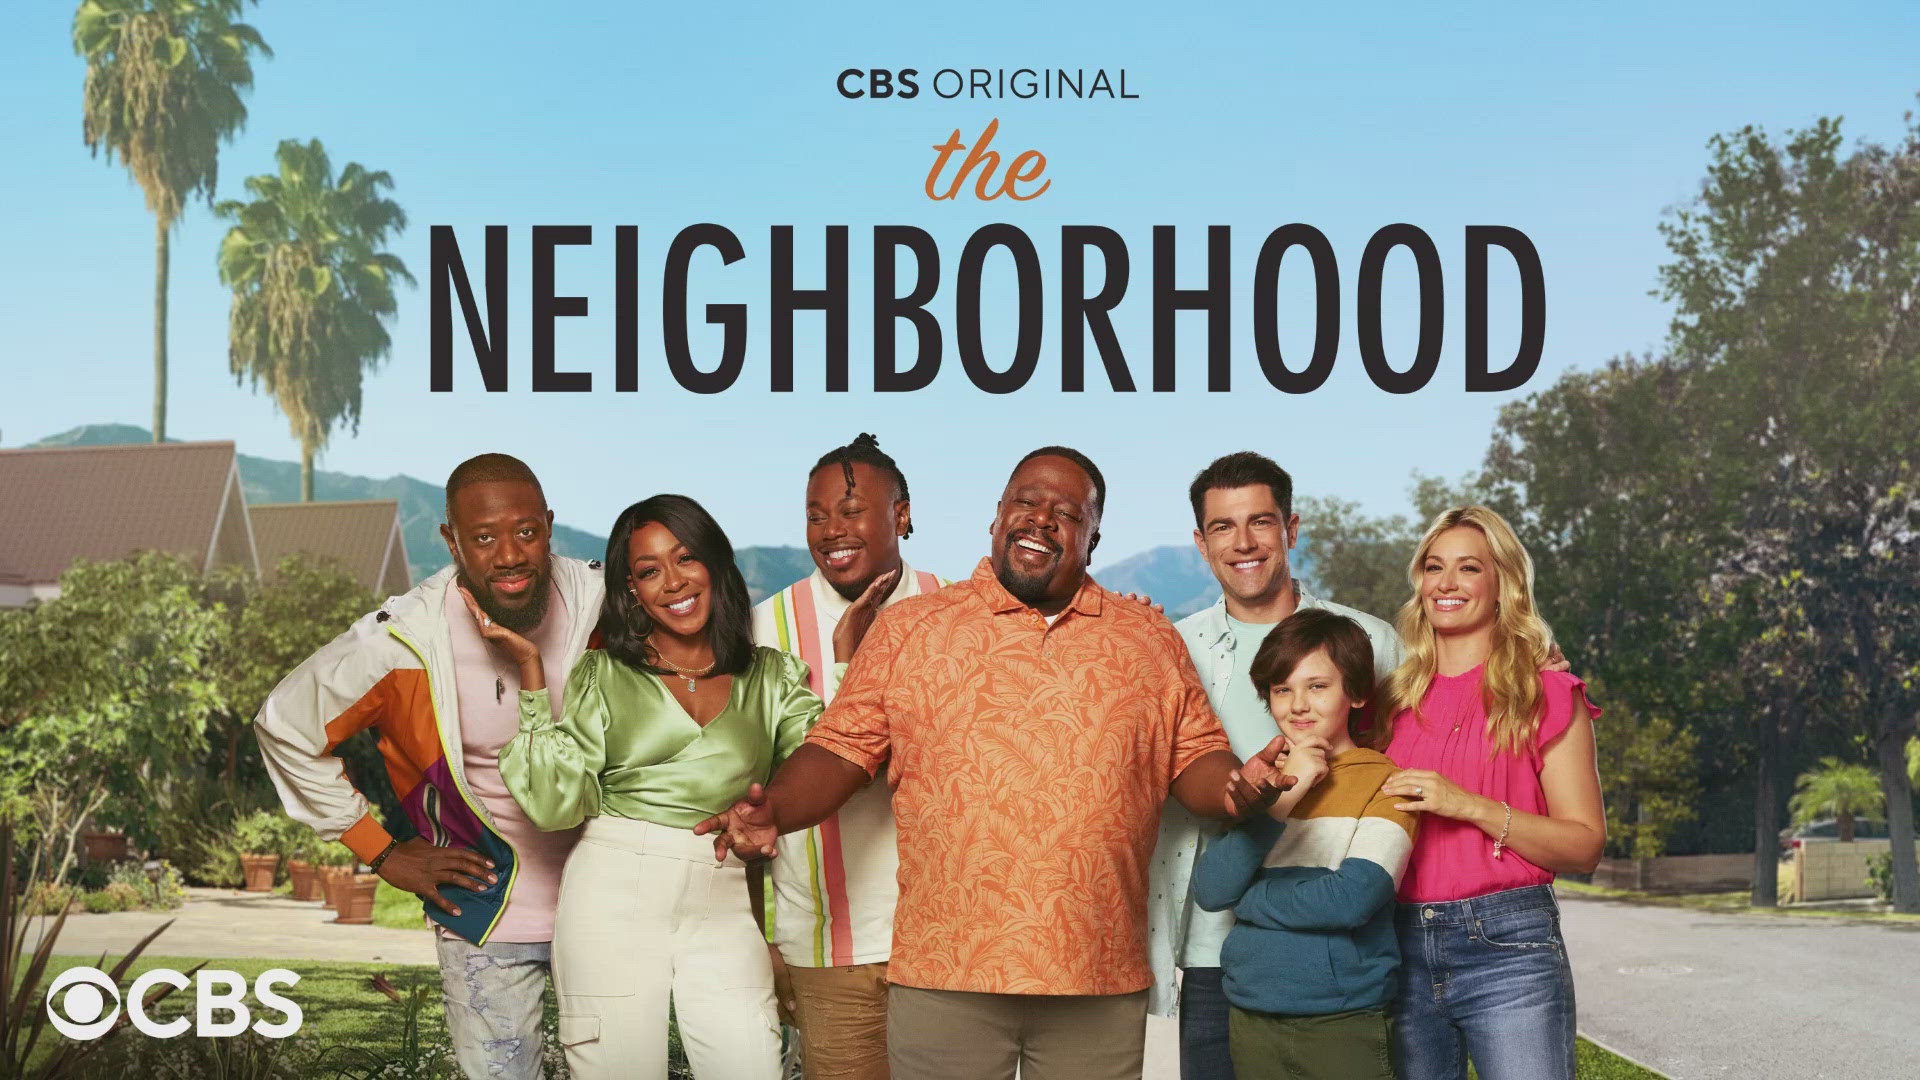 Tichina Arnold and Marcel Speak to KHOU 11's Ron Trevino on the season 6 finale of "The Neighborhood."